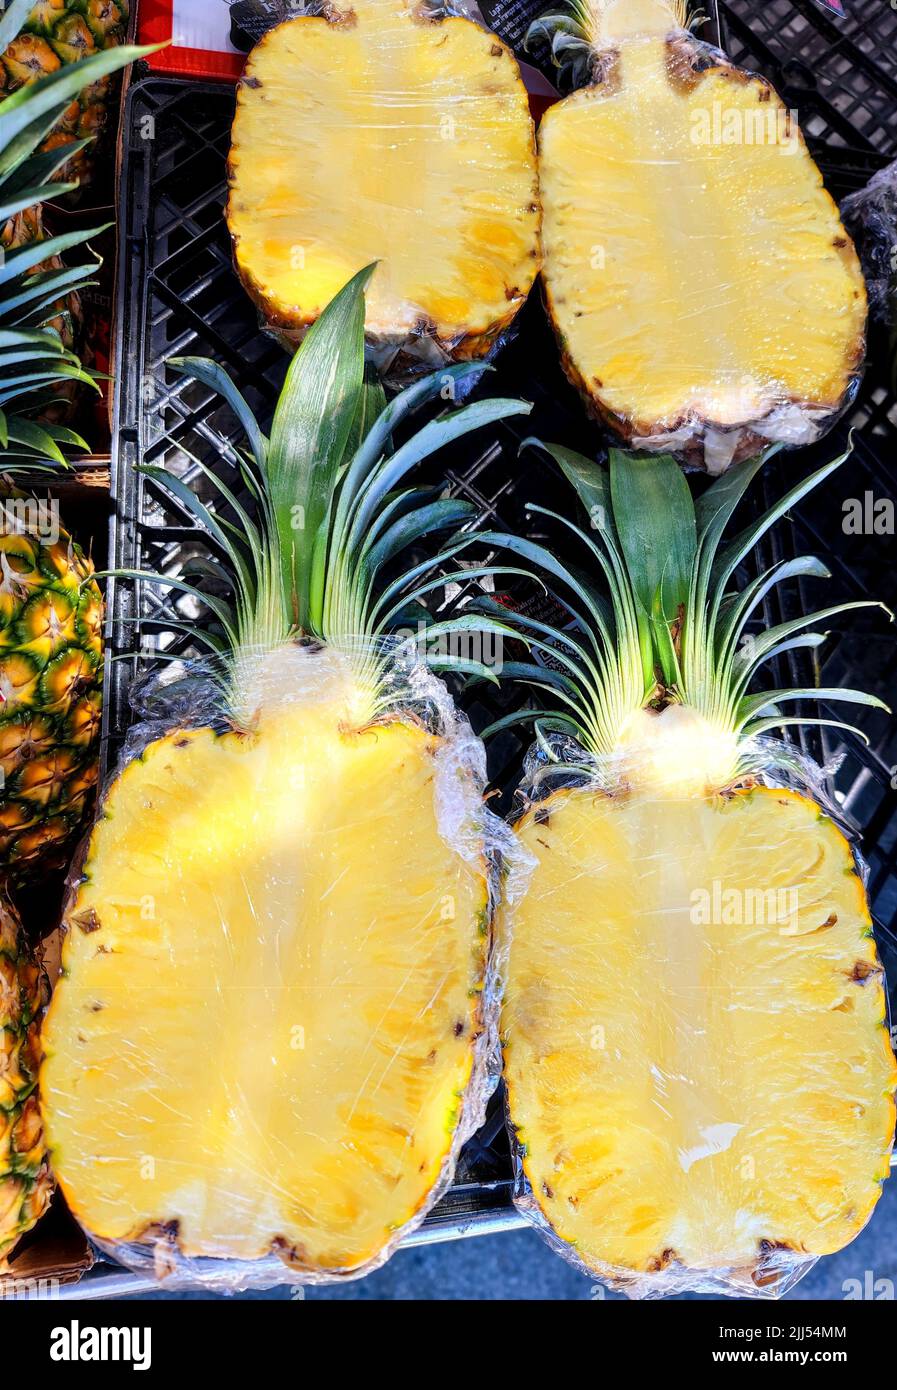 Unmarked beautifully colored sliced pineapple on store shelves in a supermarket Stock Photo